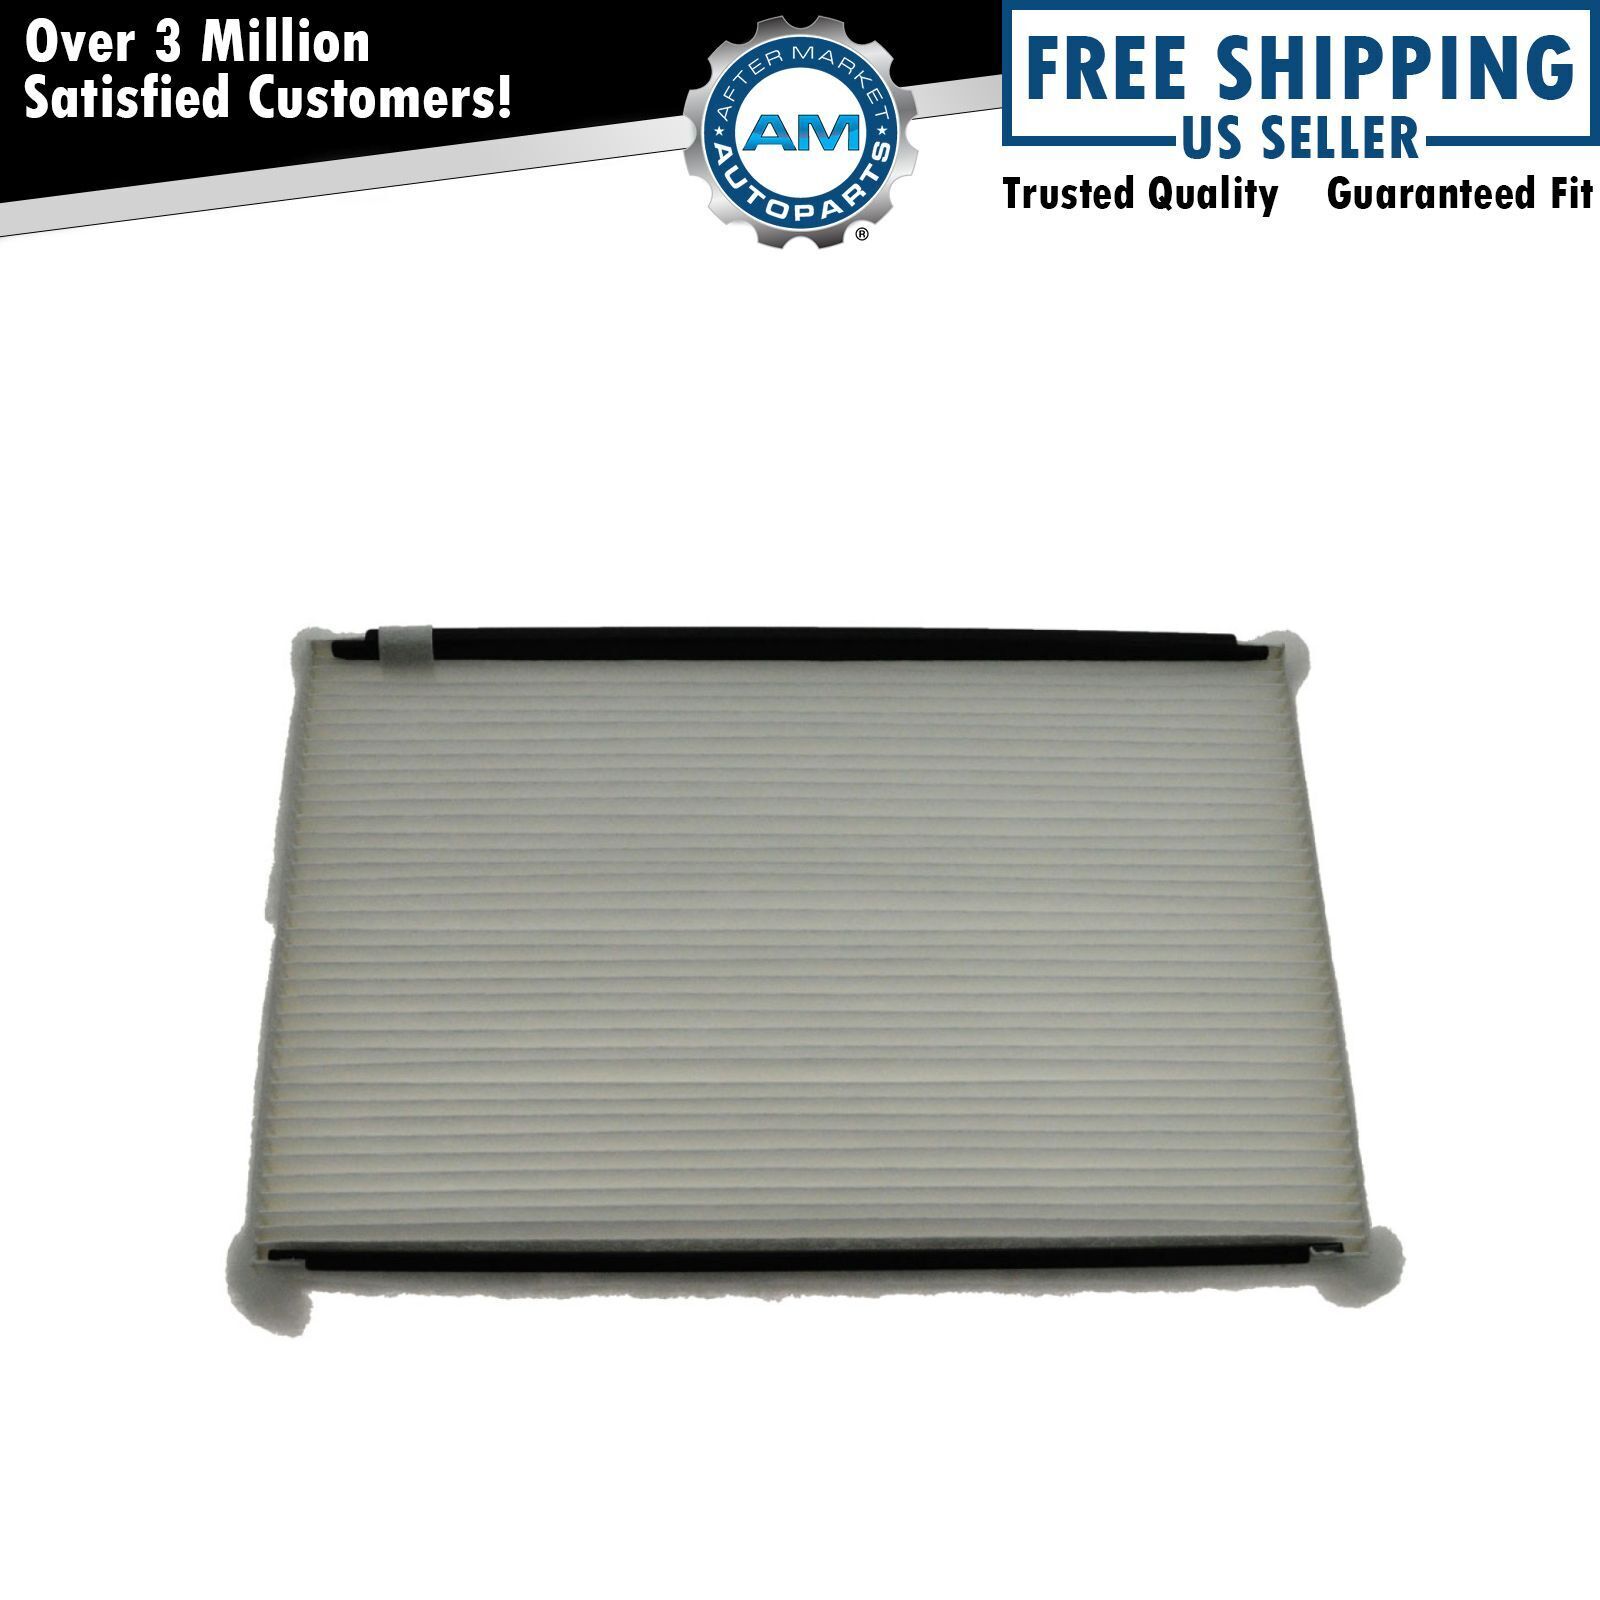 Cabin Air Filter 10395221 For Chevrolet Impala Buick Regal Century Olds Intrigue